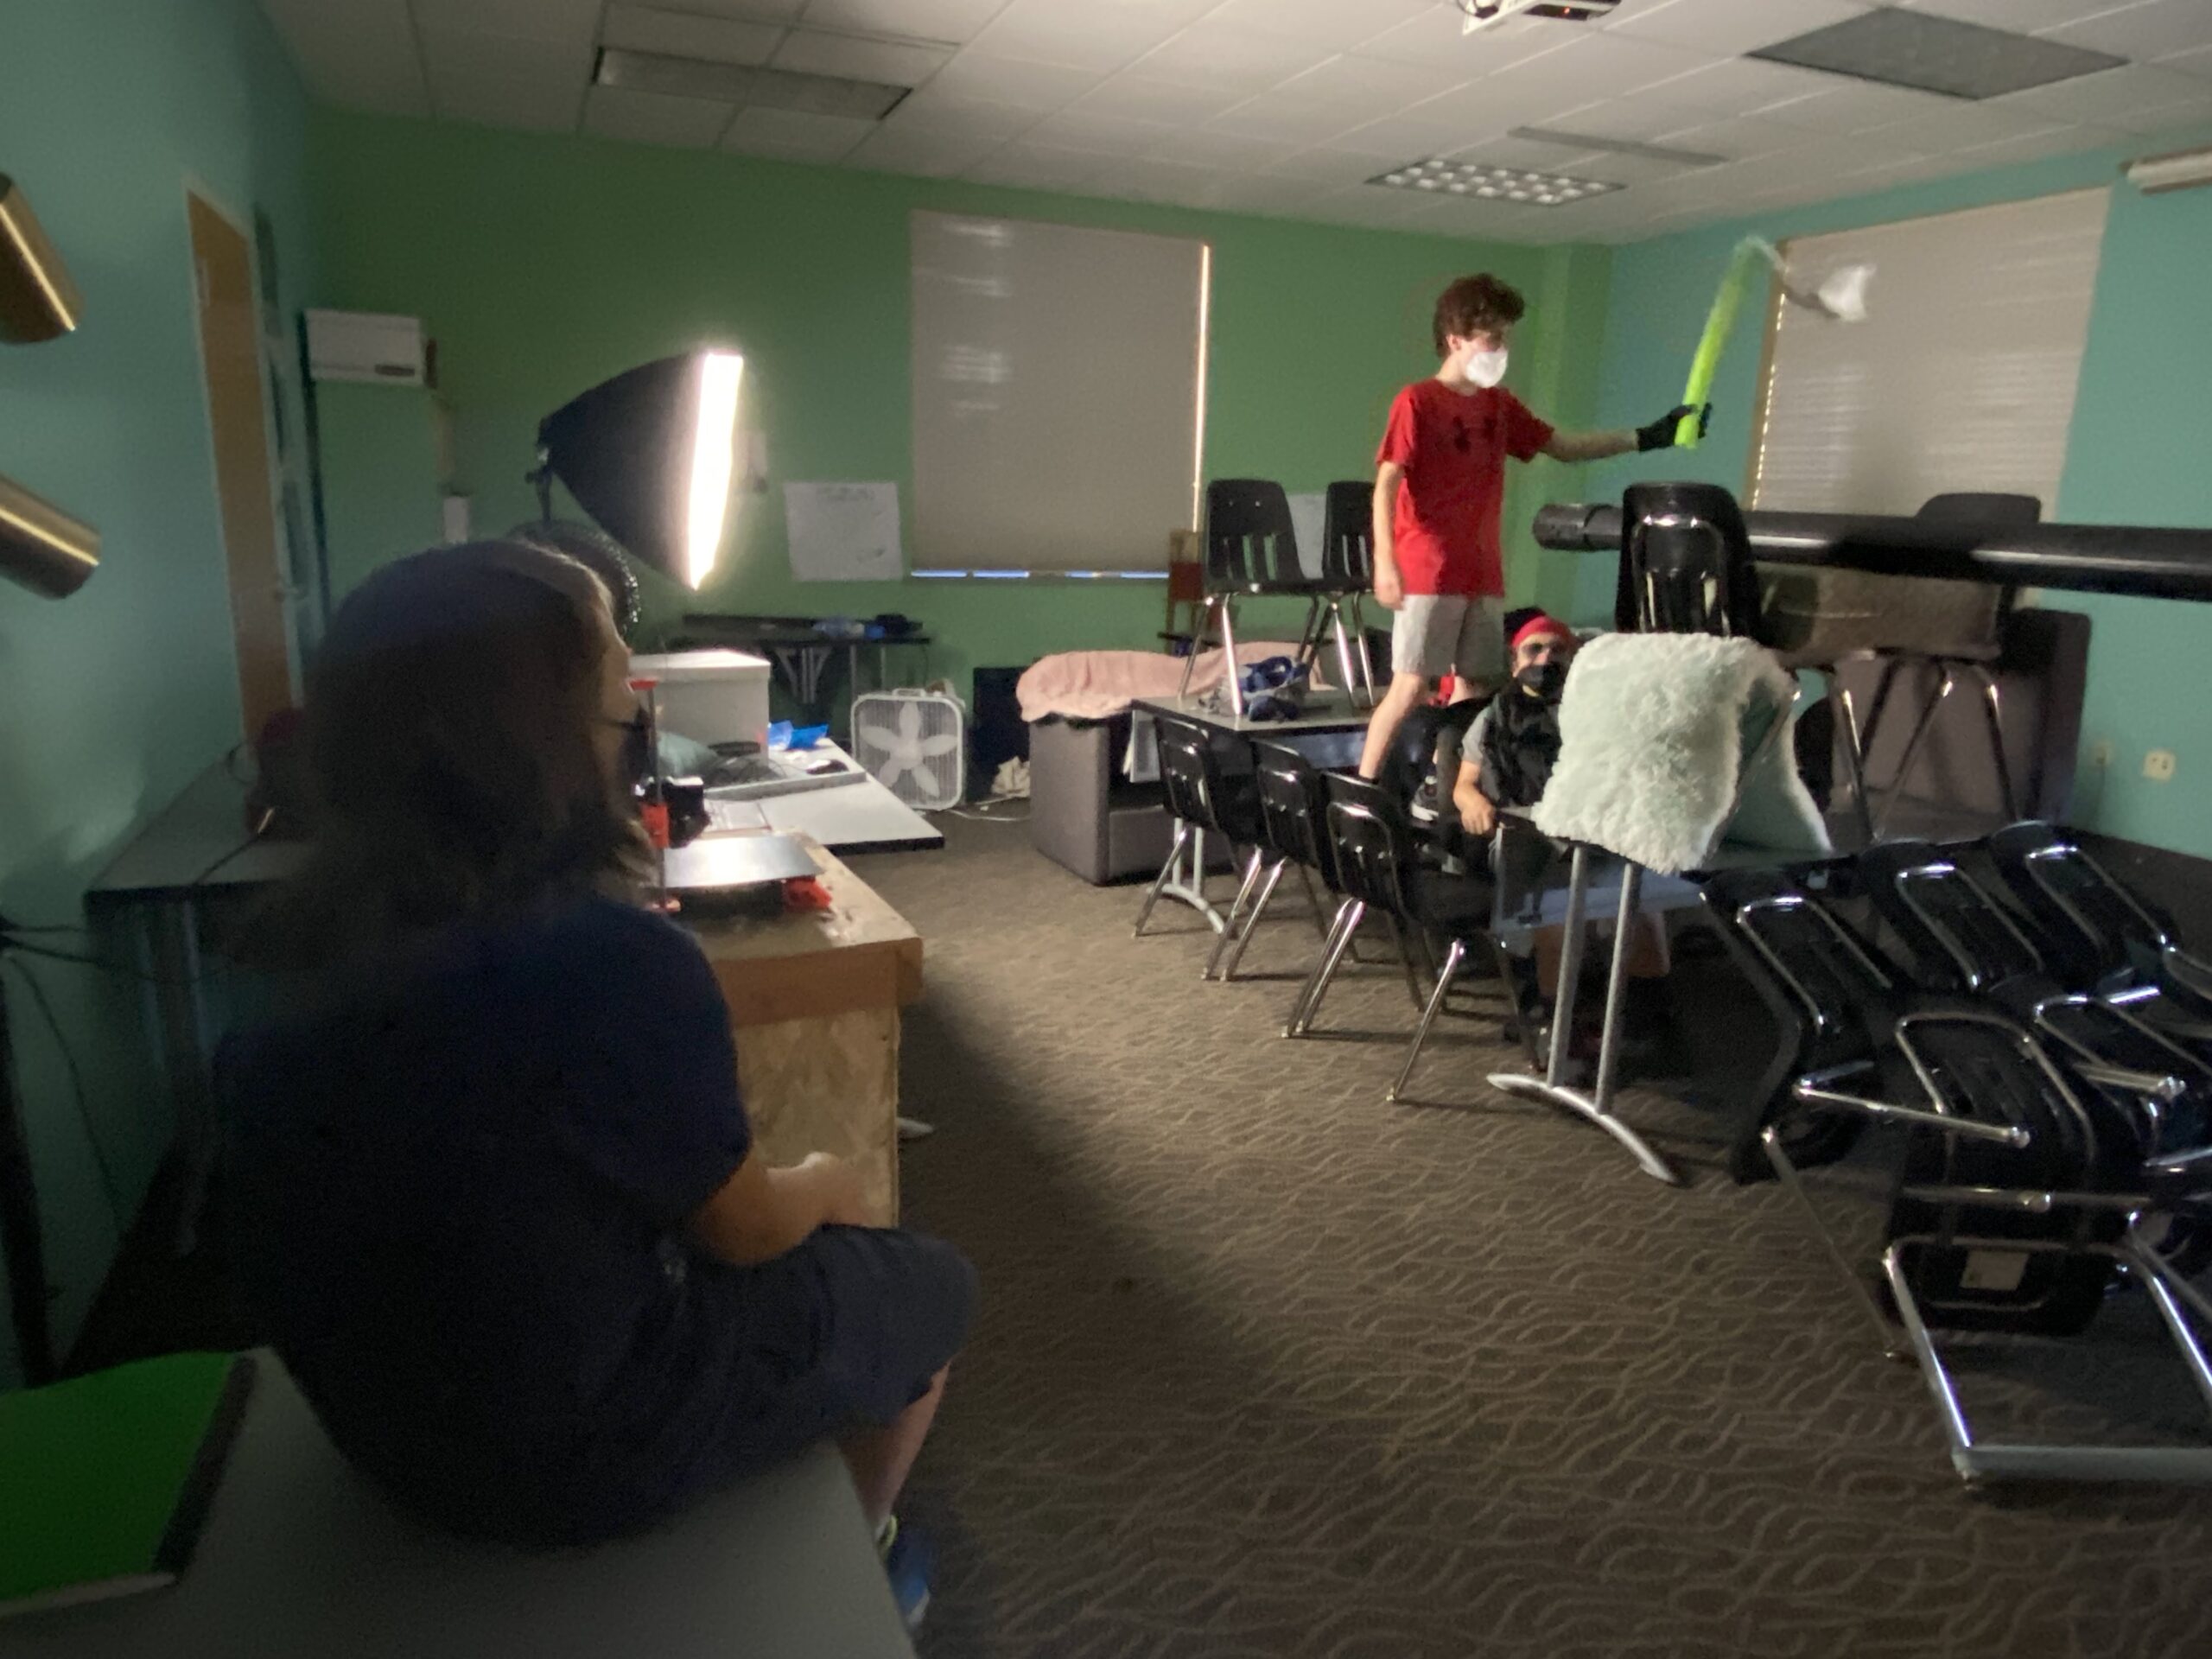 Students producing videos in the classroom.